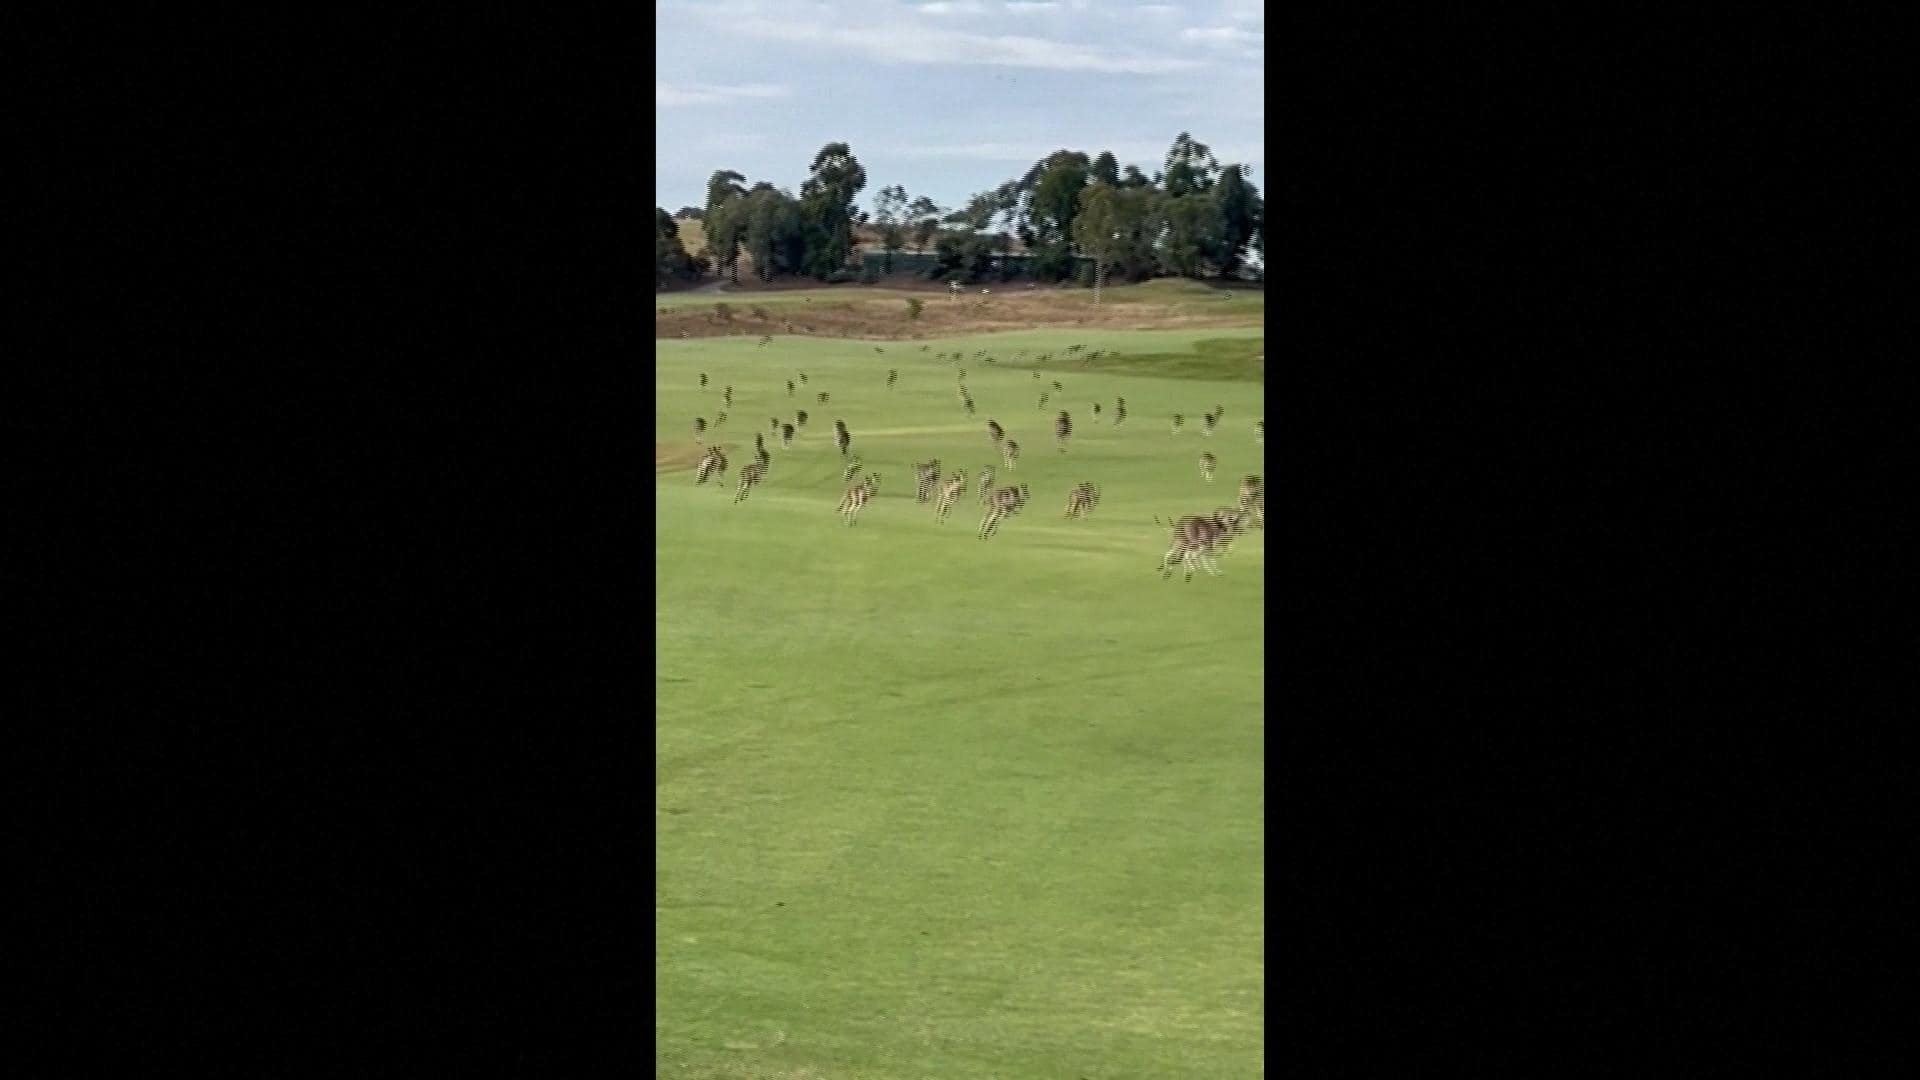 Forget storming the court — these kangaroos stampeded across the links